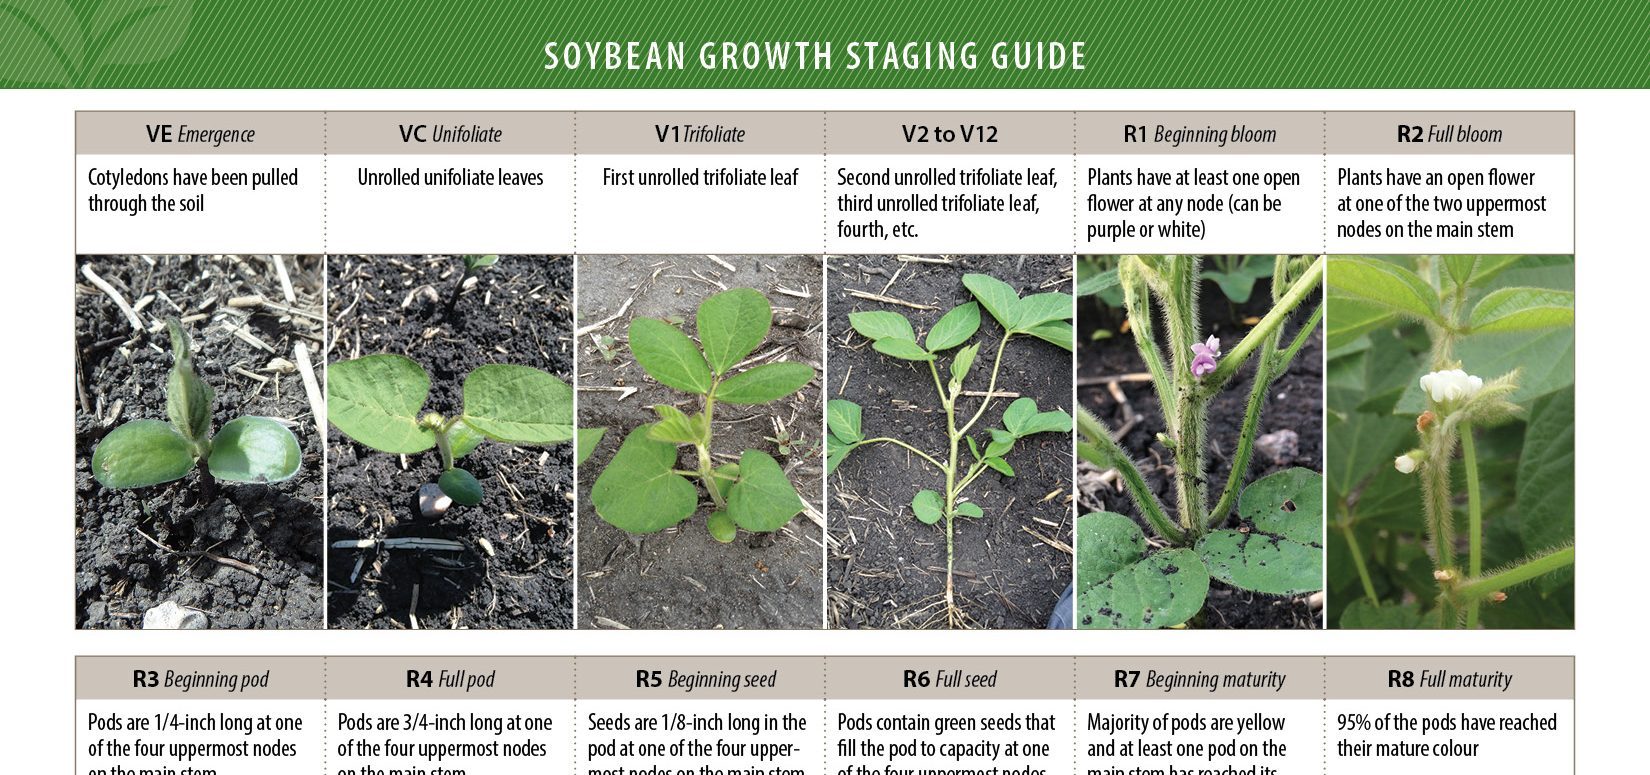 Soybean Growth Staging Guide